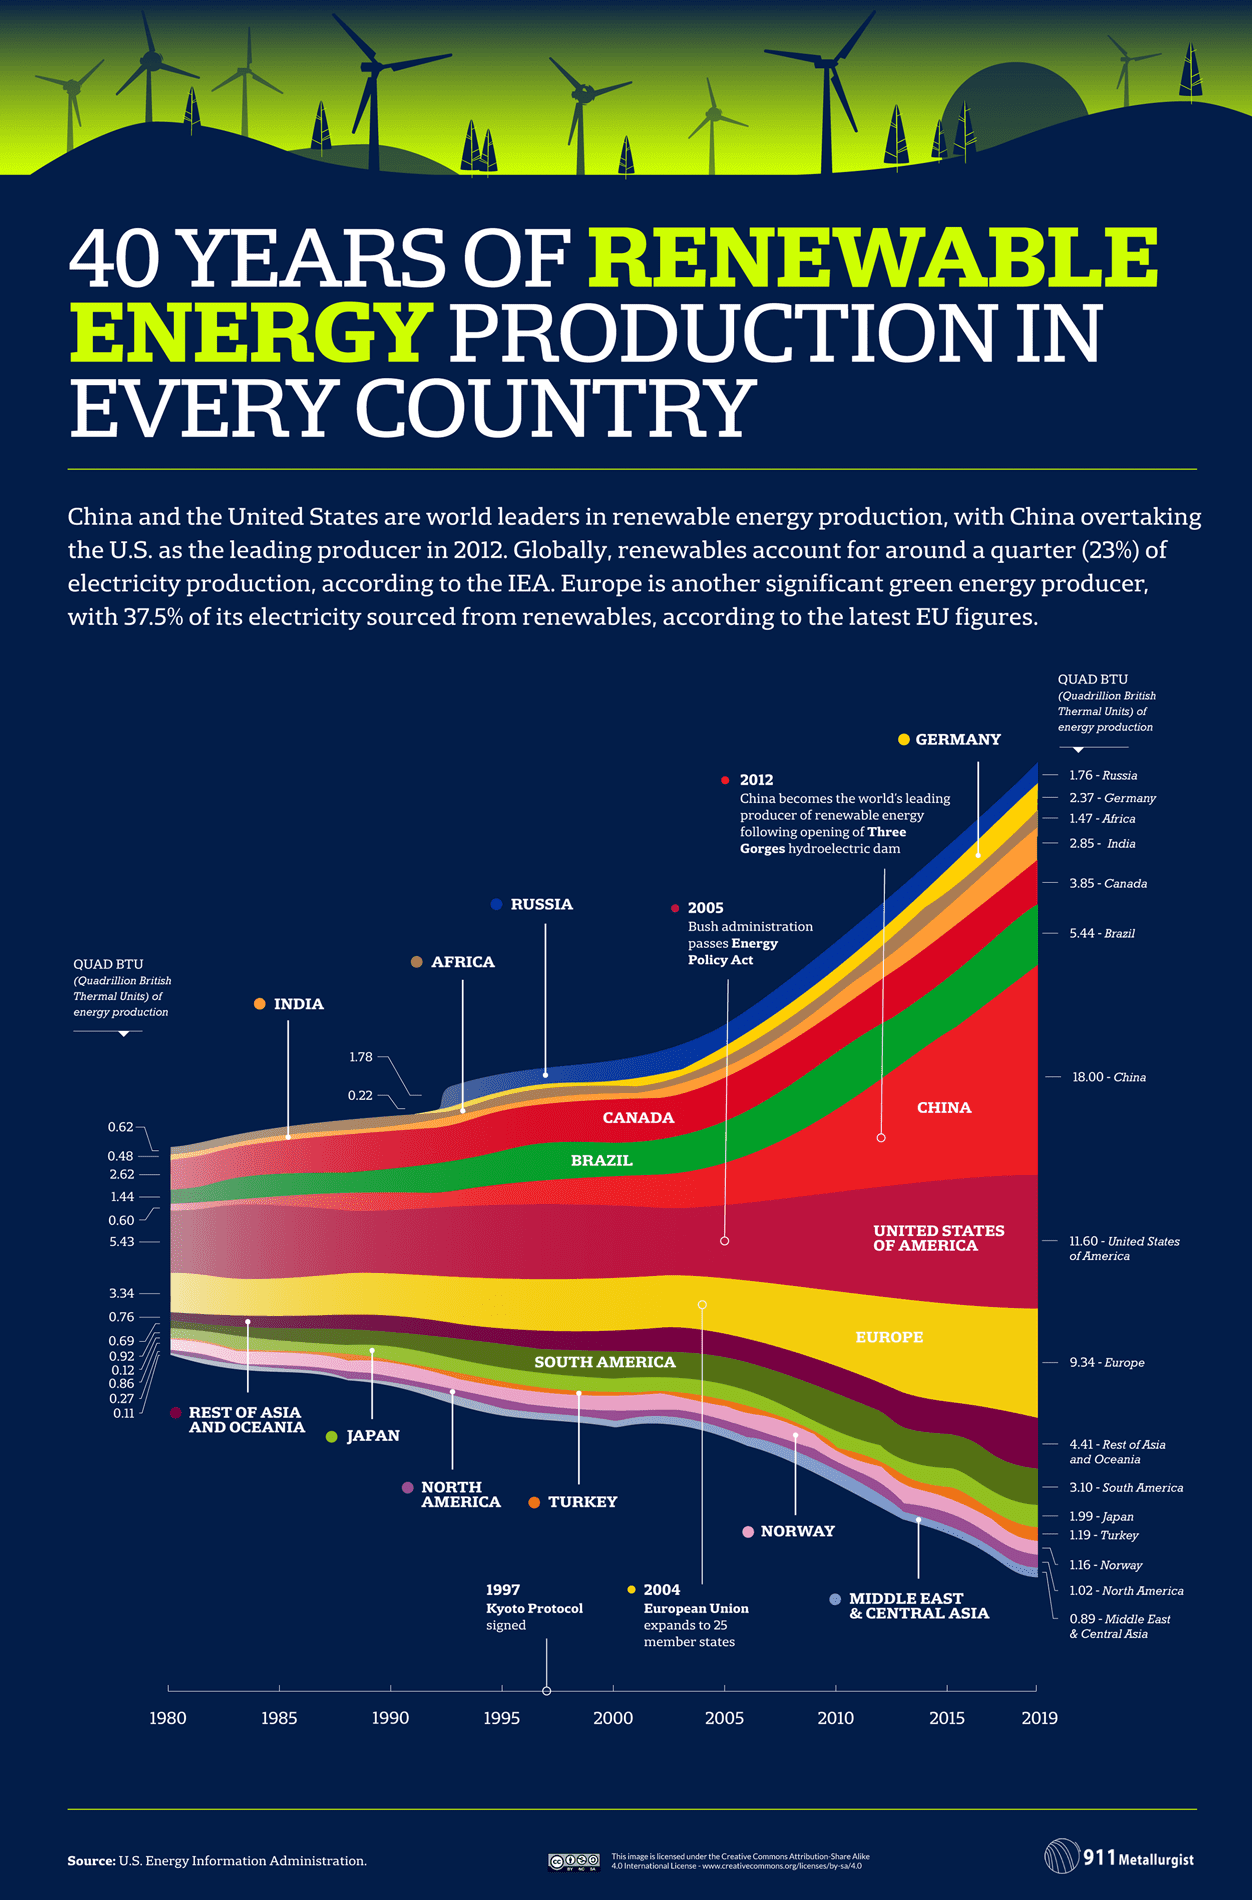 40 Years of Renewable Energy Production in Every Country